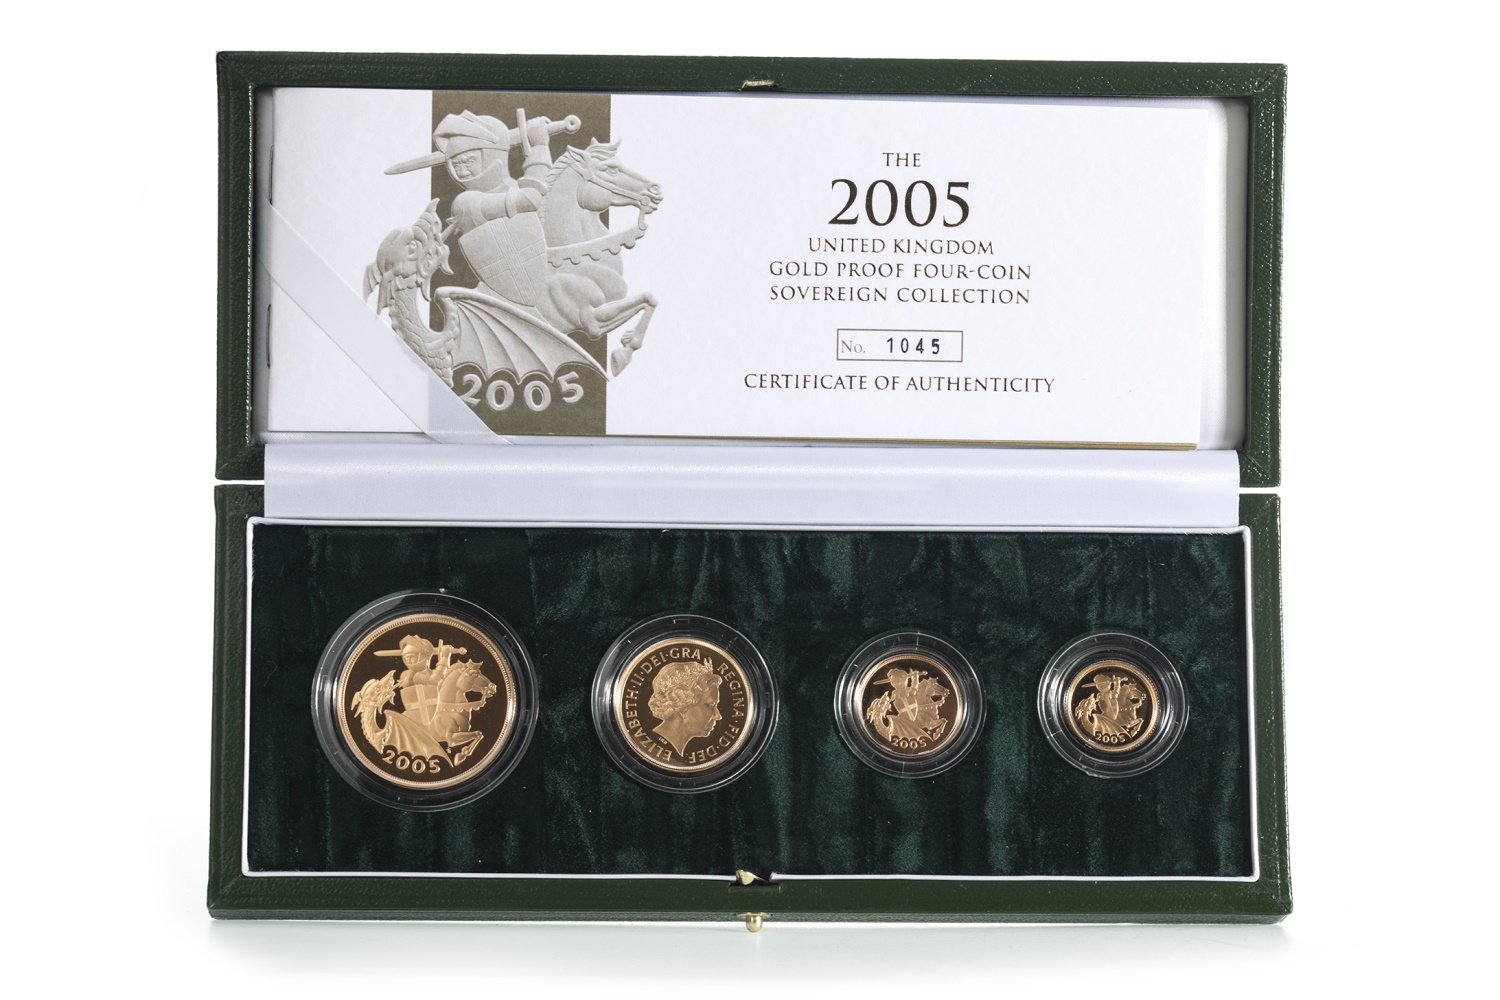 2005 GOLD PROOF UK SOVEREIGN COLLECTION FOUR COIN SET